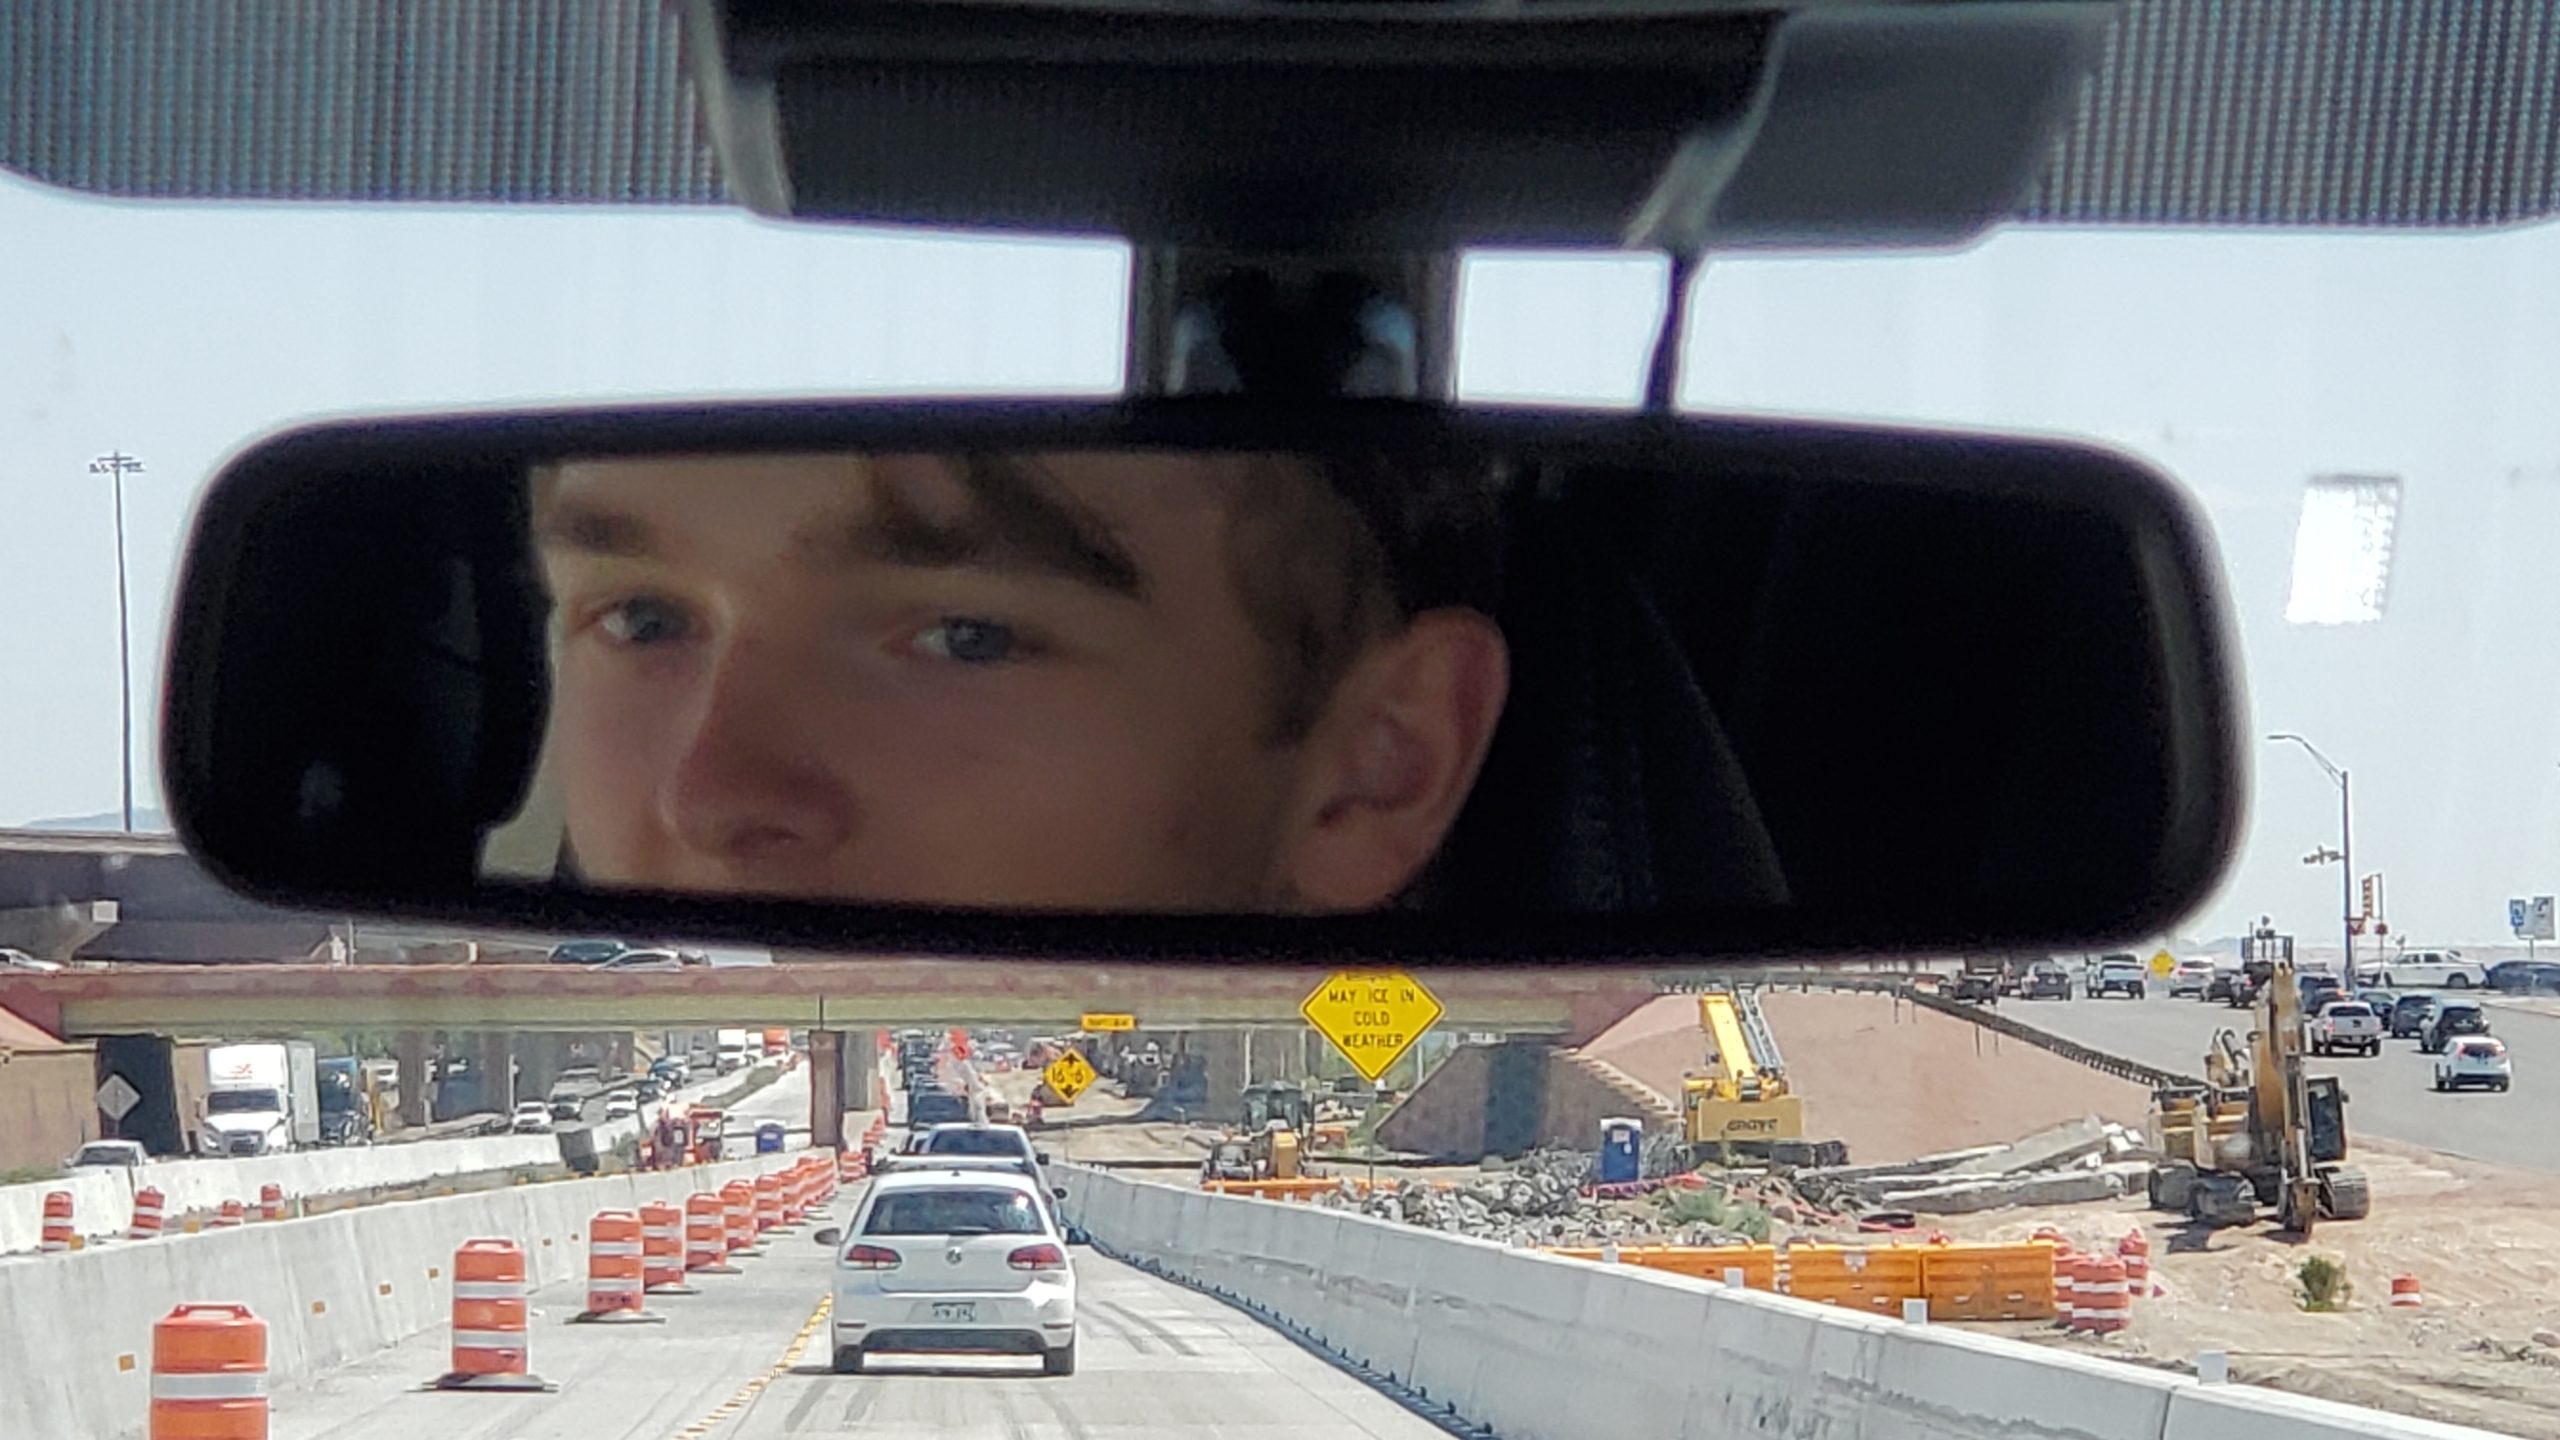 Picture of Ryan's eyes in the rear view mirror, with San Antonio traffic ahead of him.